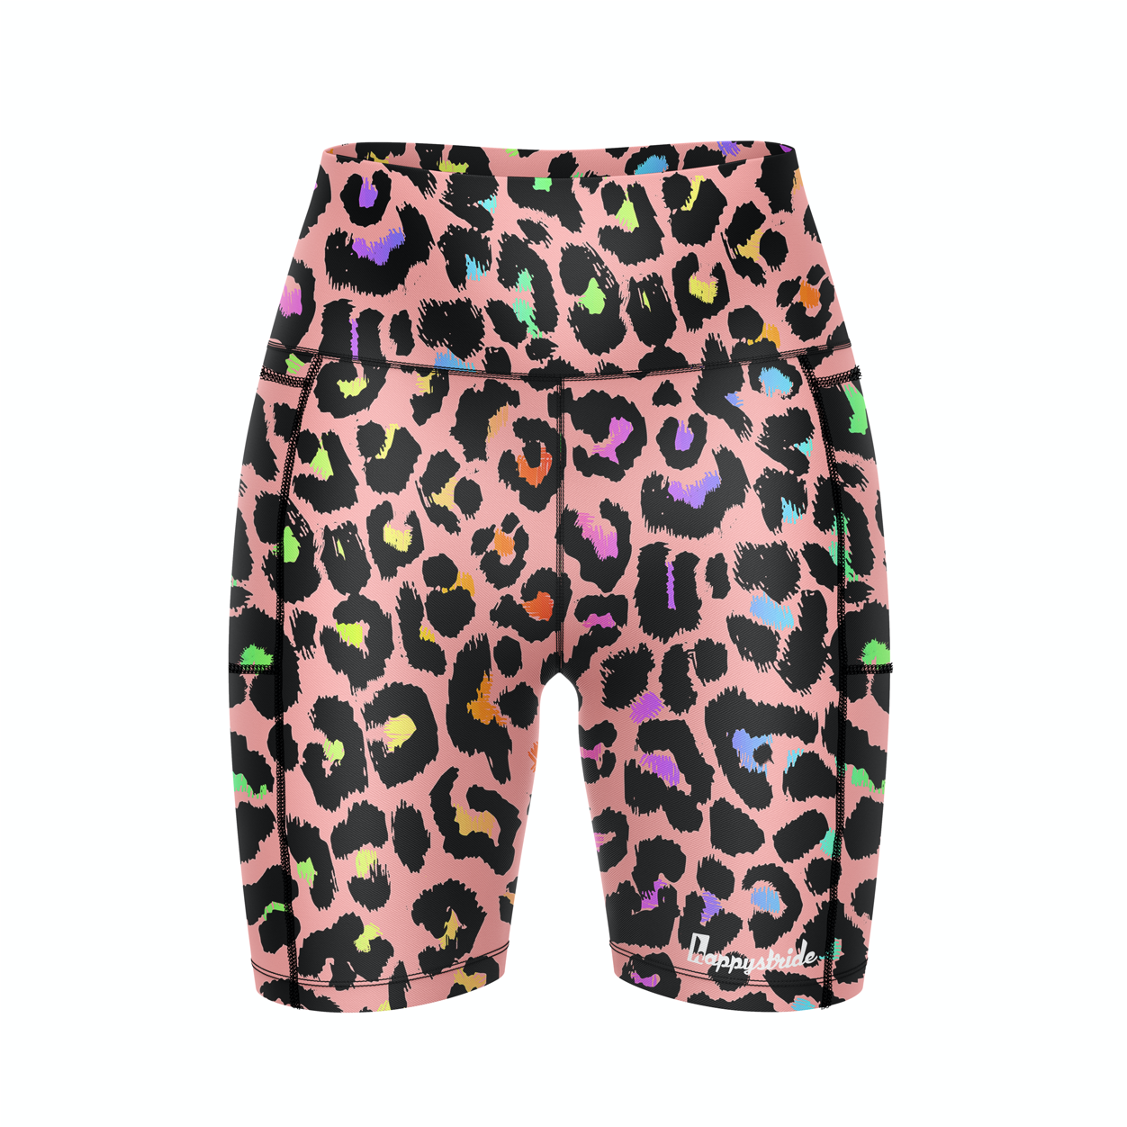 Get spotted” fresh leopard print cool colourful fun bright unisex 2-in-1  running & fitness leopard print shorts – Happystride